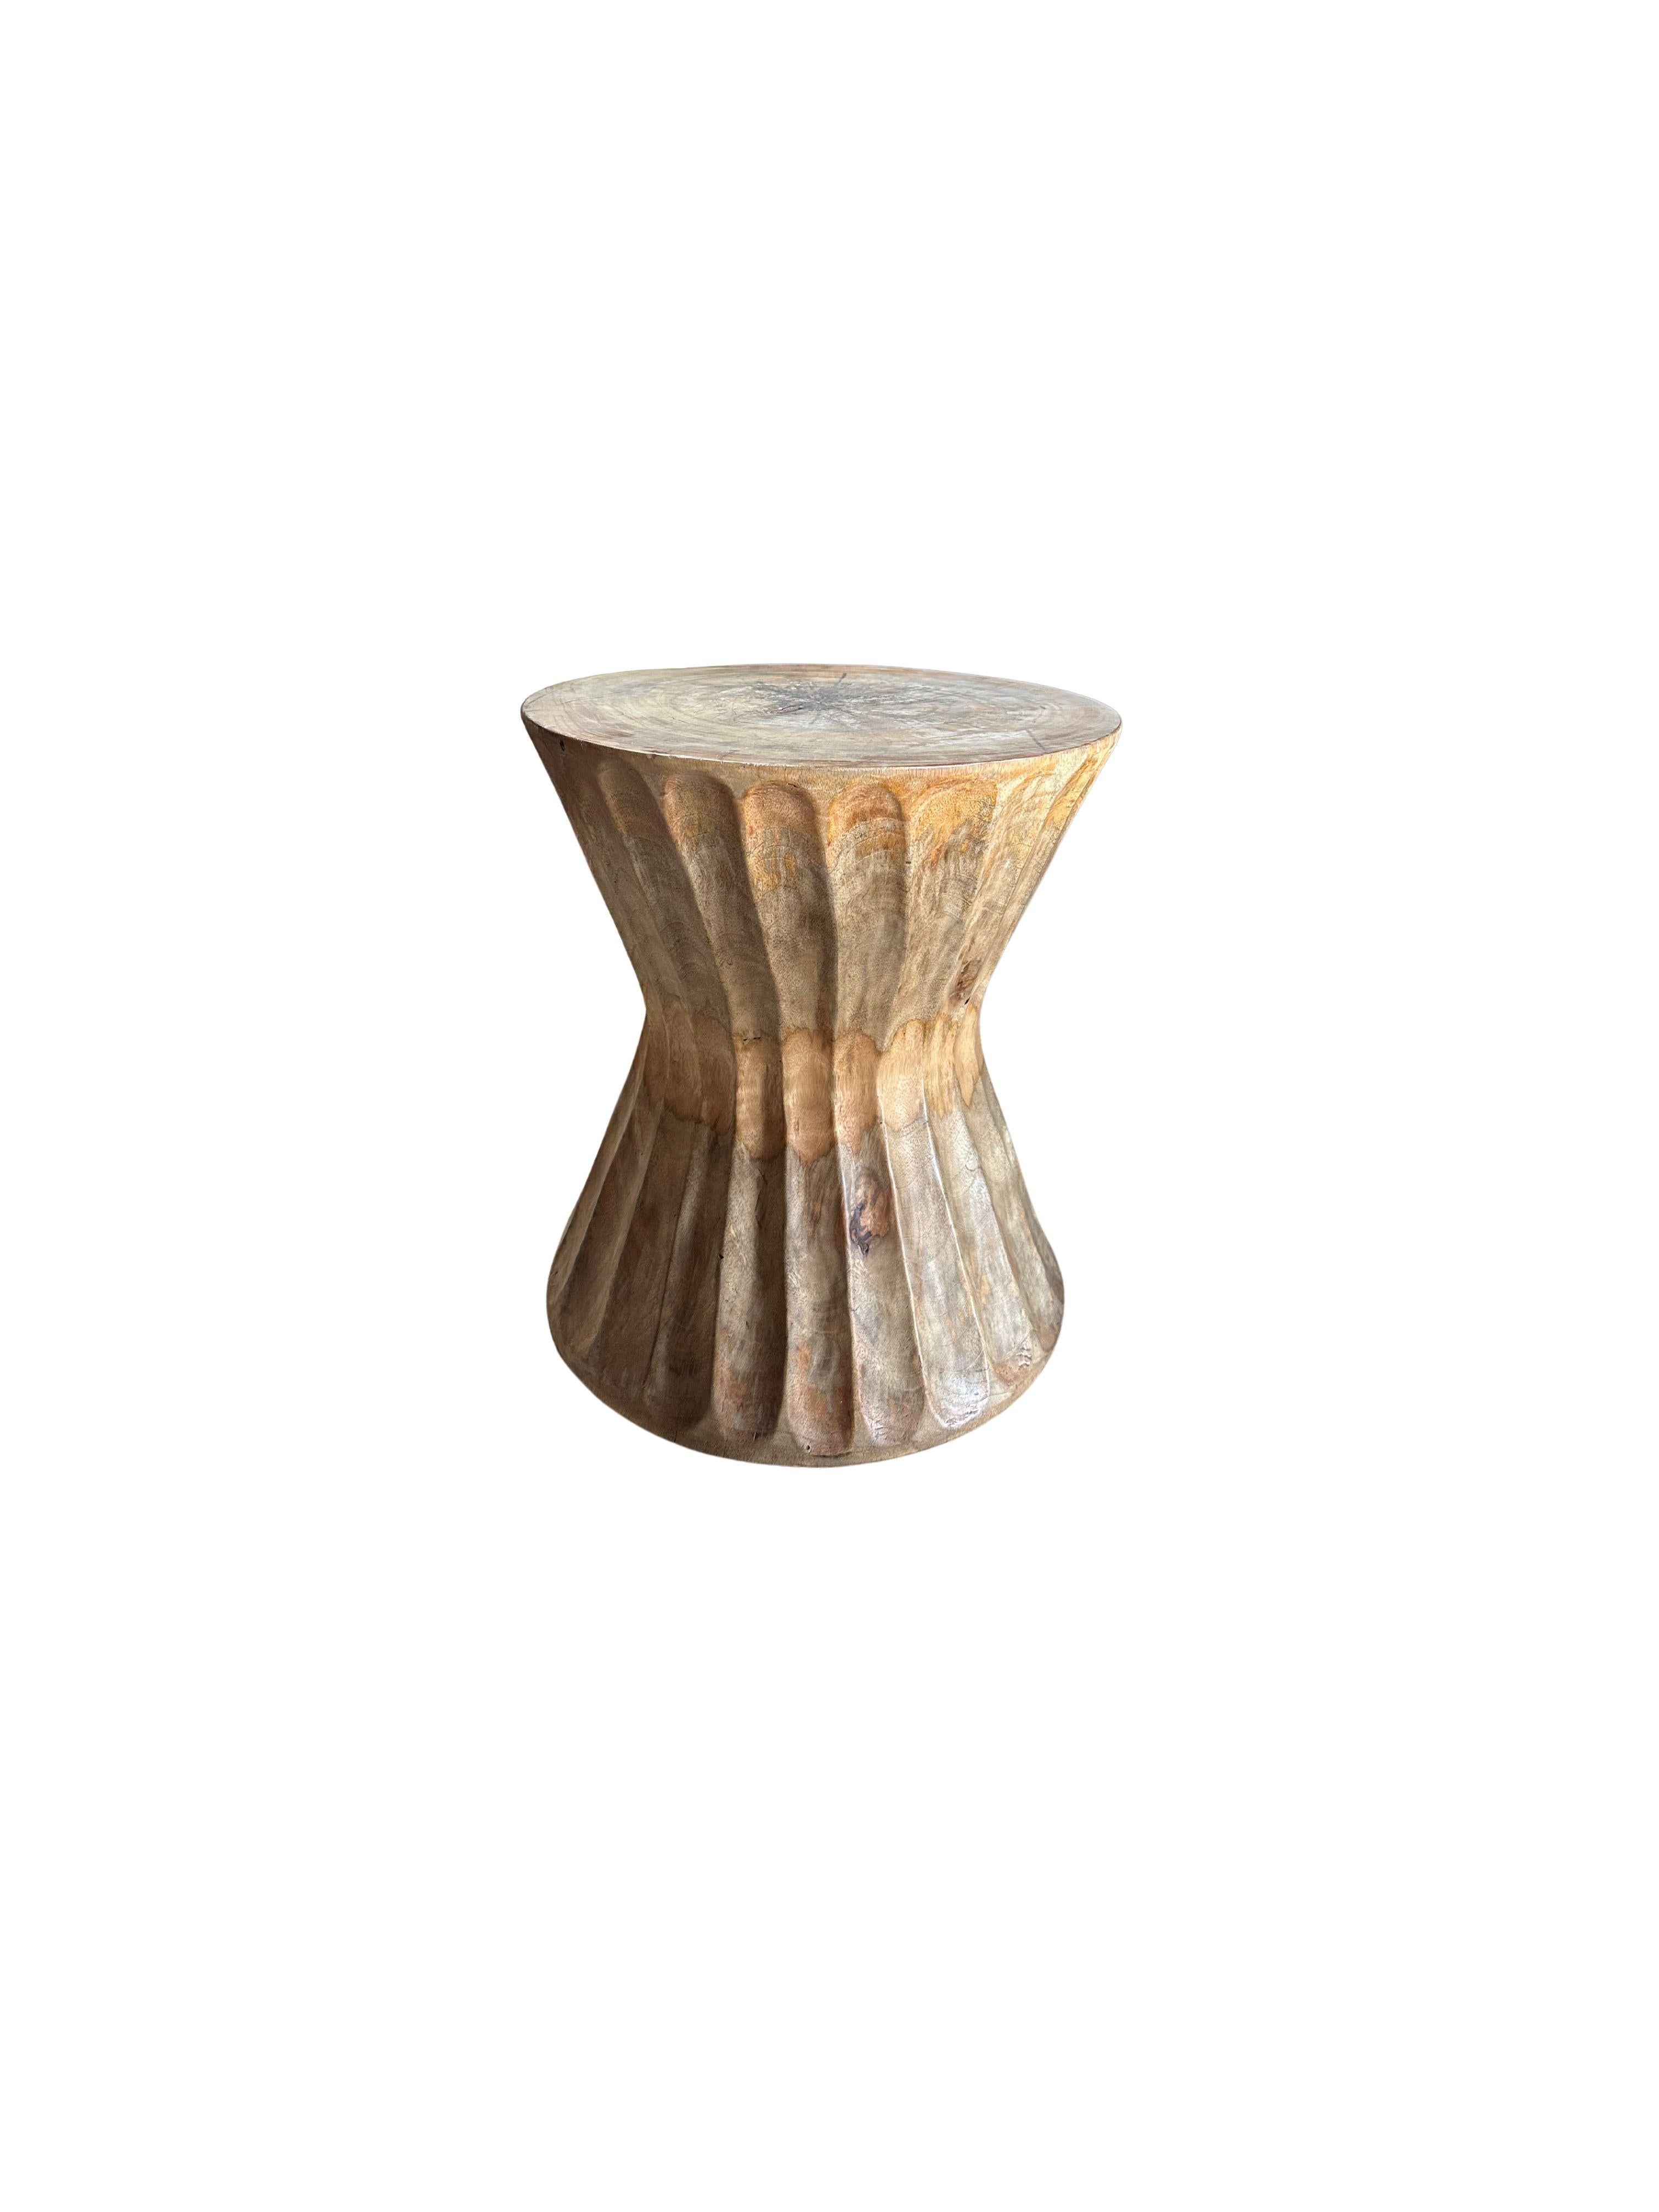 Organic Modern Round Mango Wood Side Table, Carved Detailing, Modern Organic For Sale